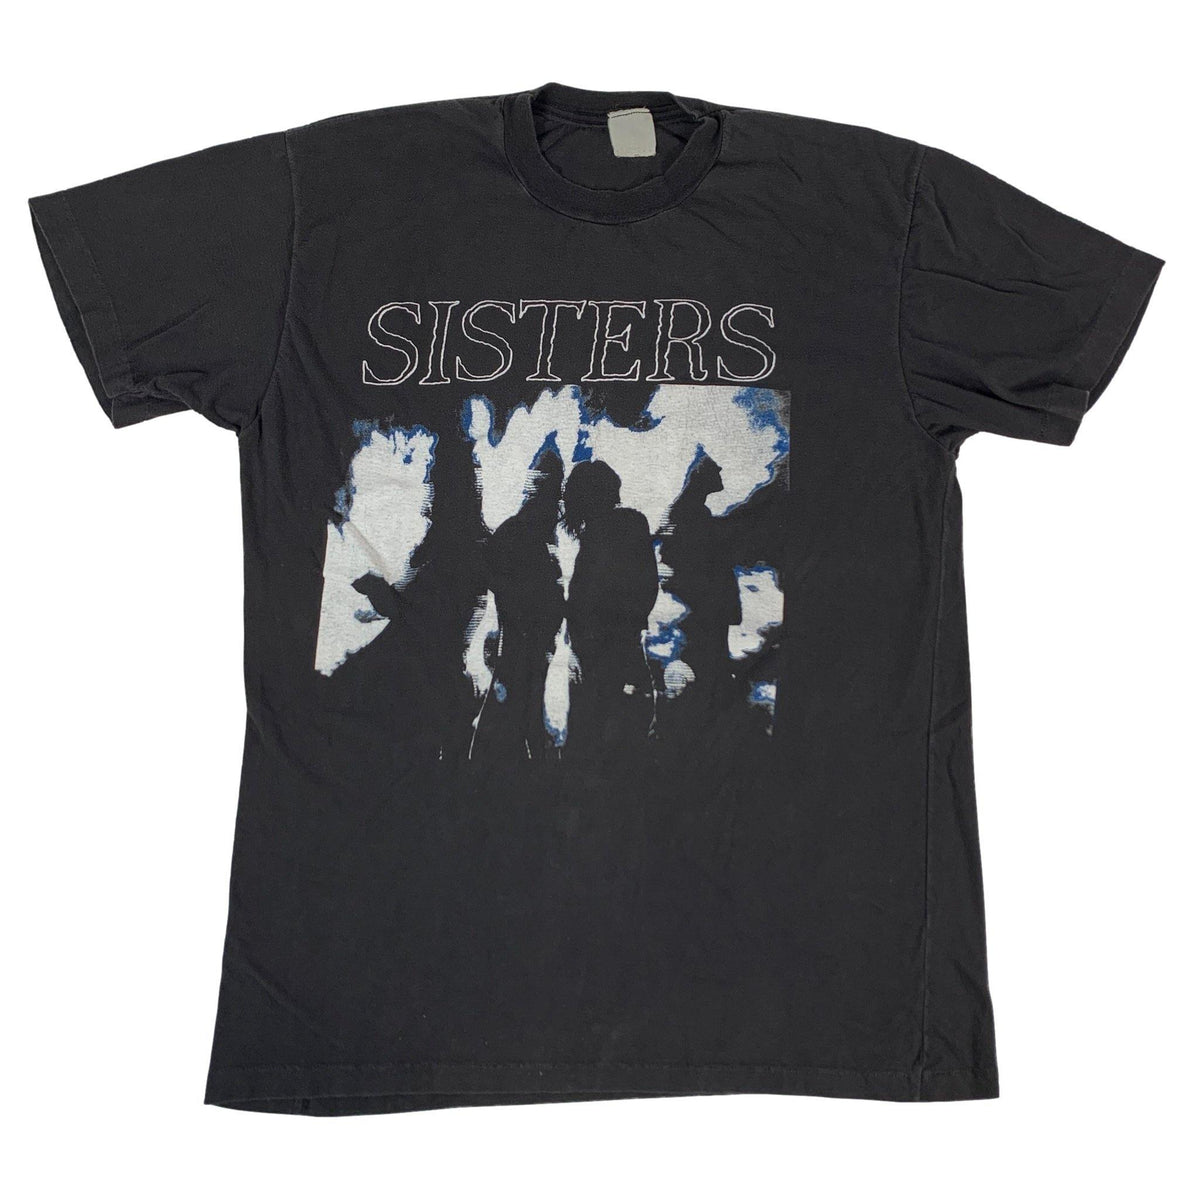 Vintage The Sisters Of Mercy &quot;Merciful Release&quot; T-Shirt - jointcustodydc